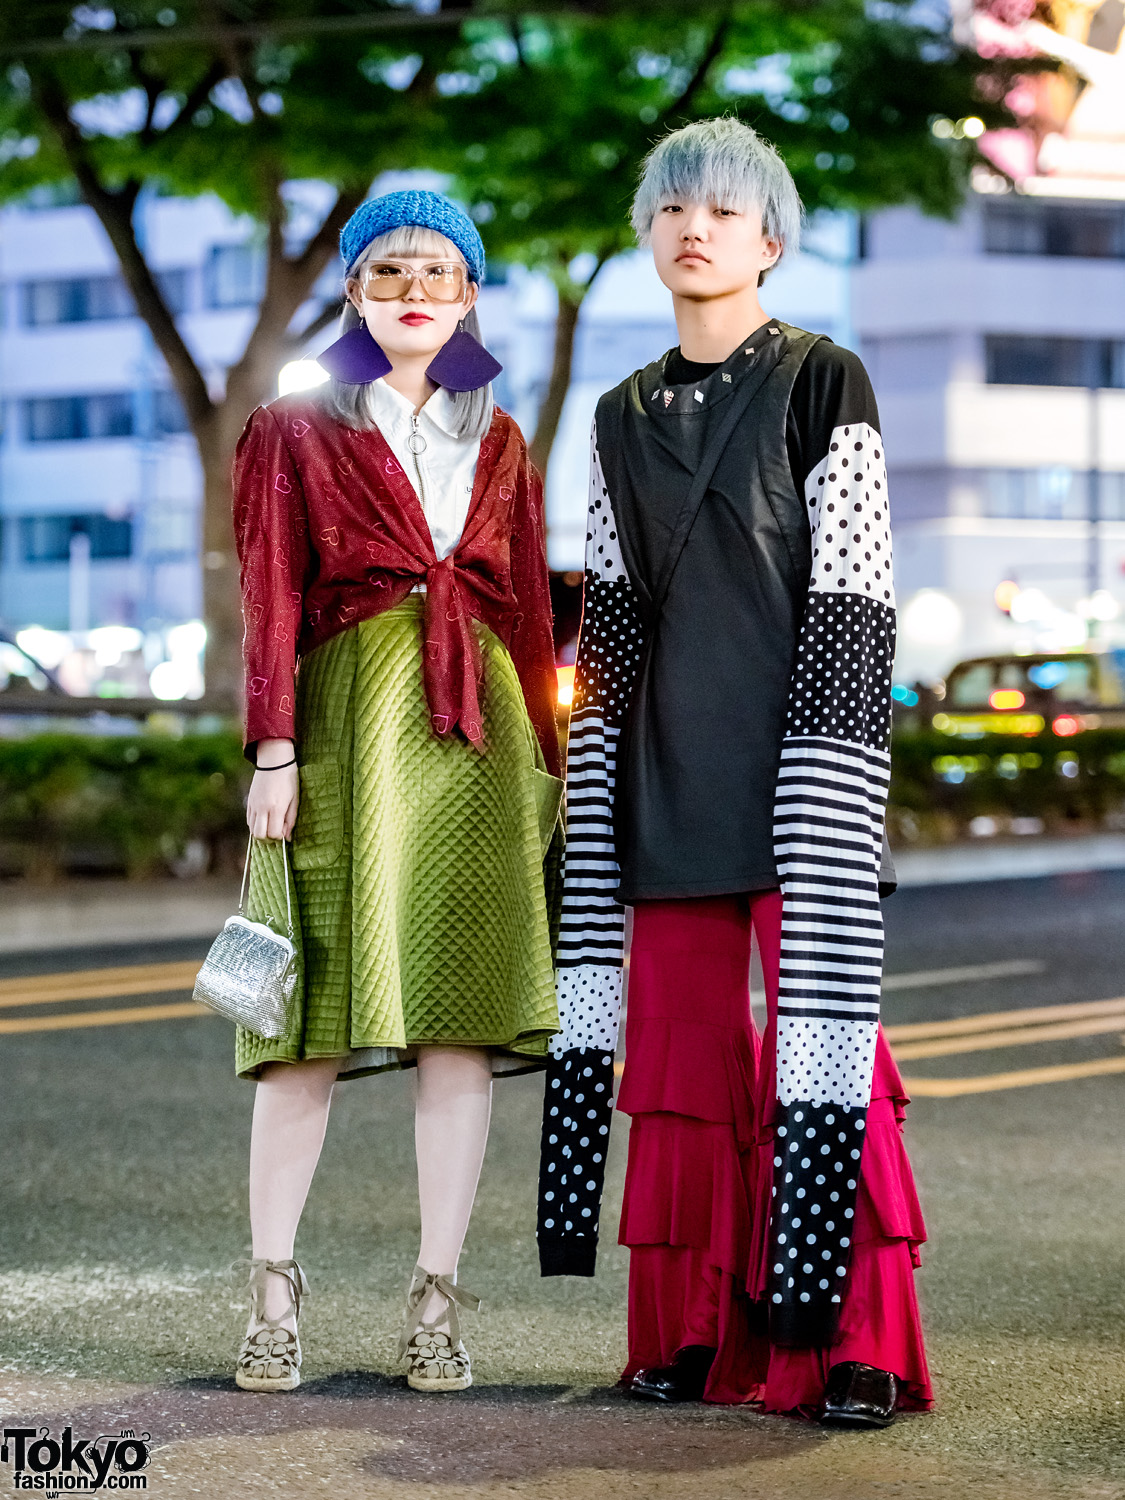 Japanese Street Styles w/ Extra Long Sleeves, Aymmy in the Batty Girls ...